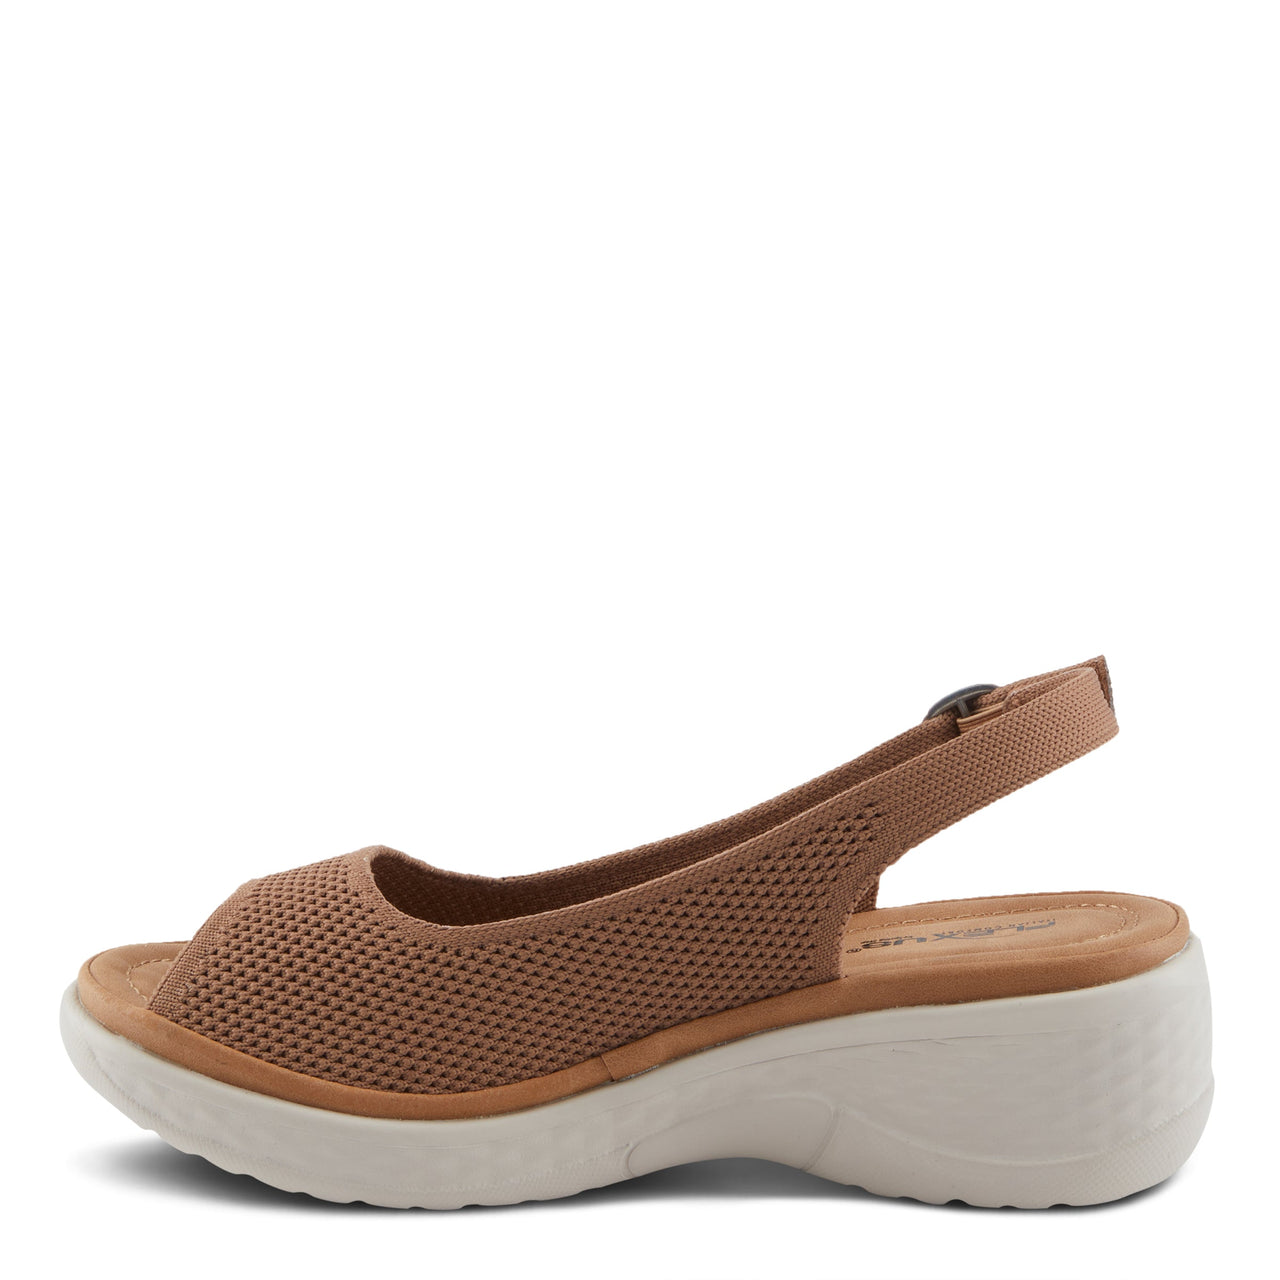 Spring Step Shoes Flexus Mayberry Sandals featuring comfortable and stylish design for women's footwear collection